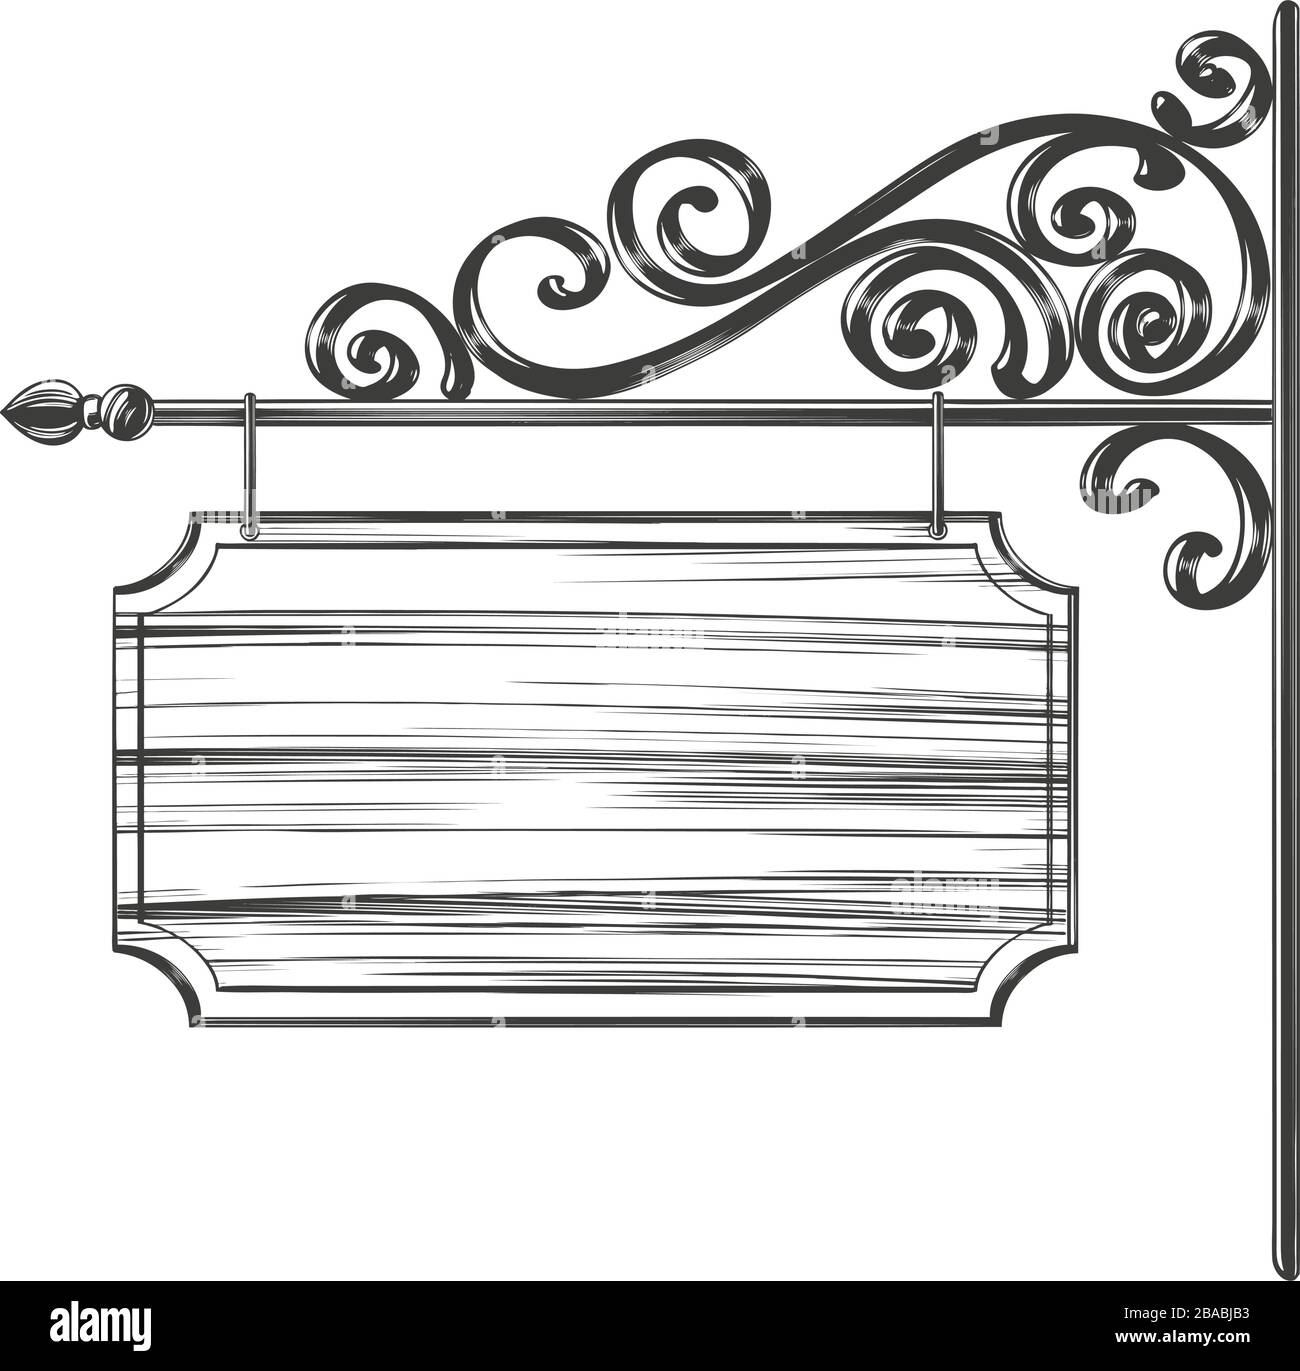 decorative street sign with wrought iron elements hand drawn vector illustration sketch isolated on a white background Stock Vector